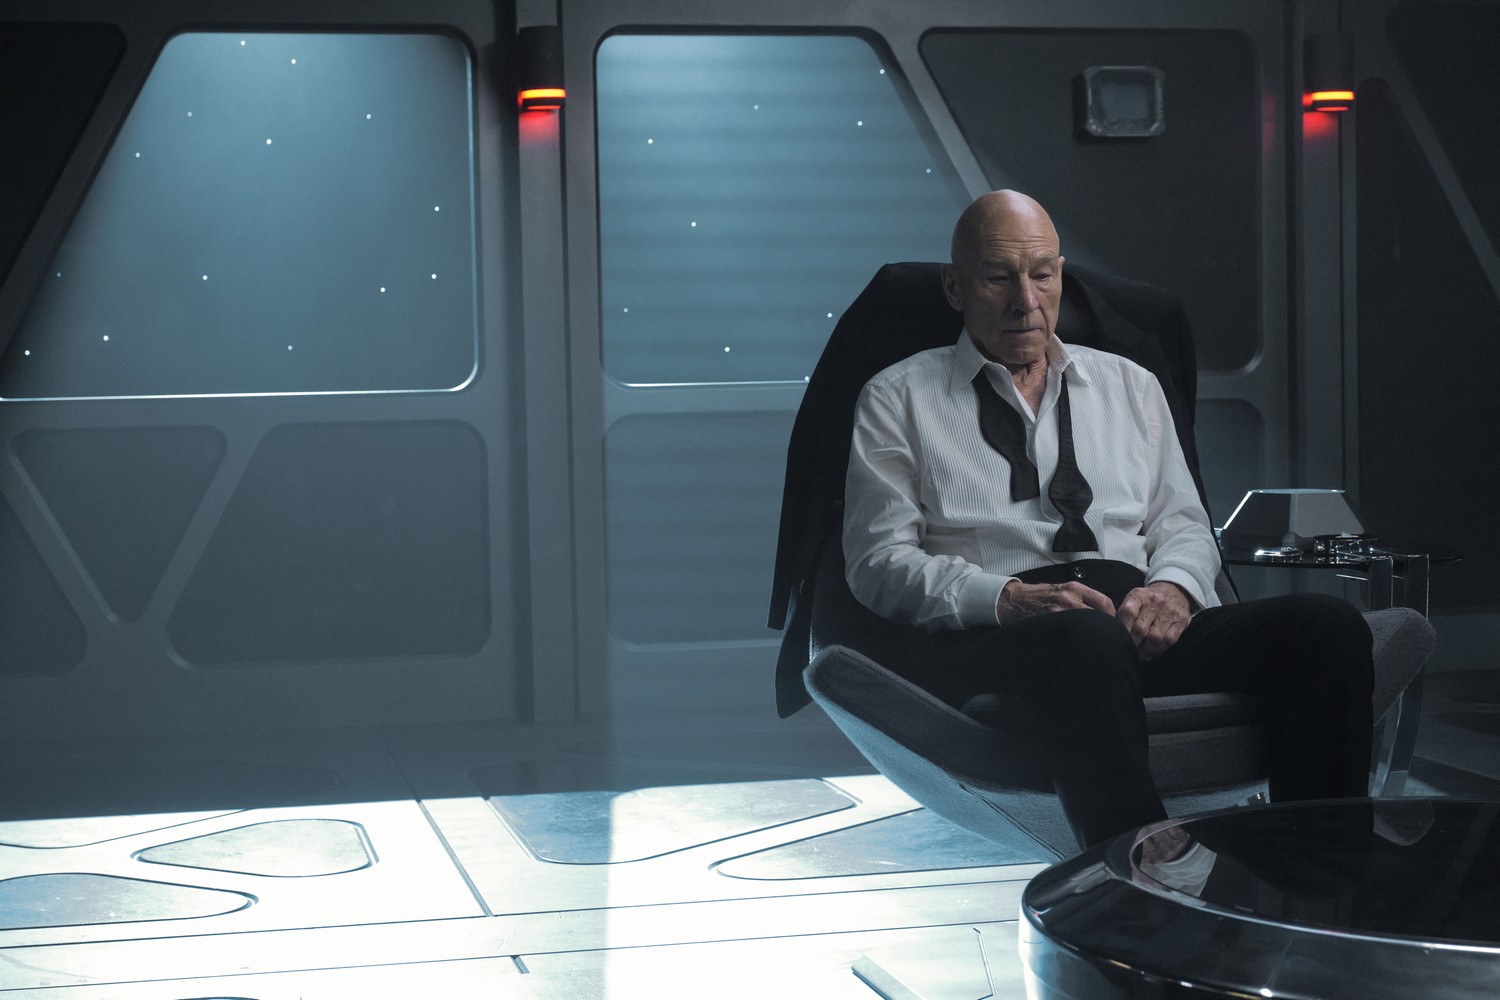 Star Trek: Picard S2 Episode 4 Review: 'Watcher' Slows Down at Its Peril